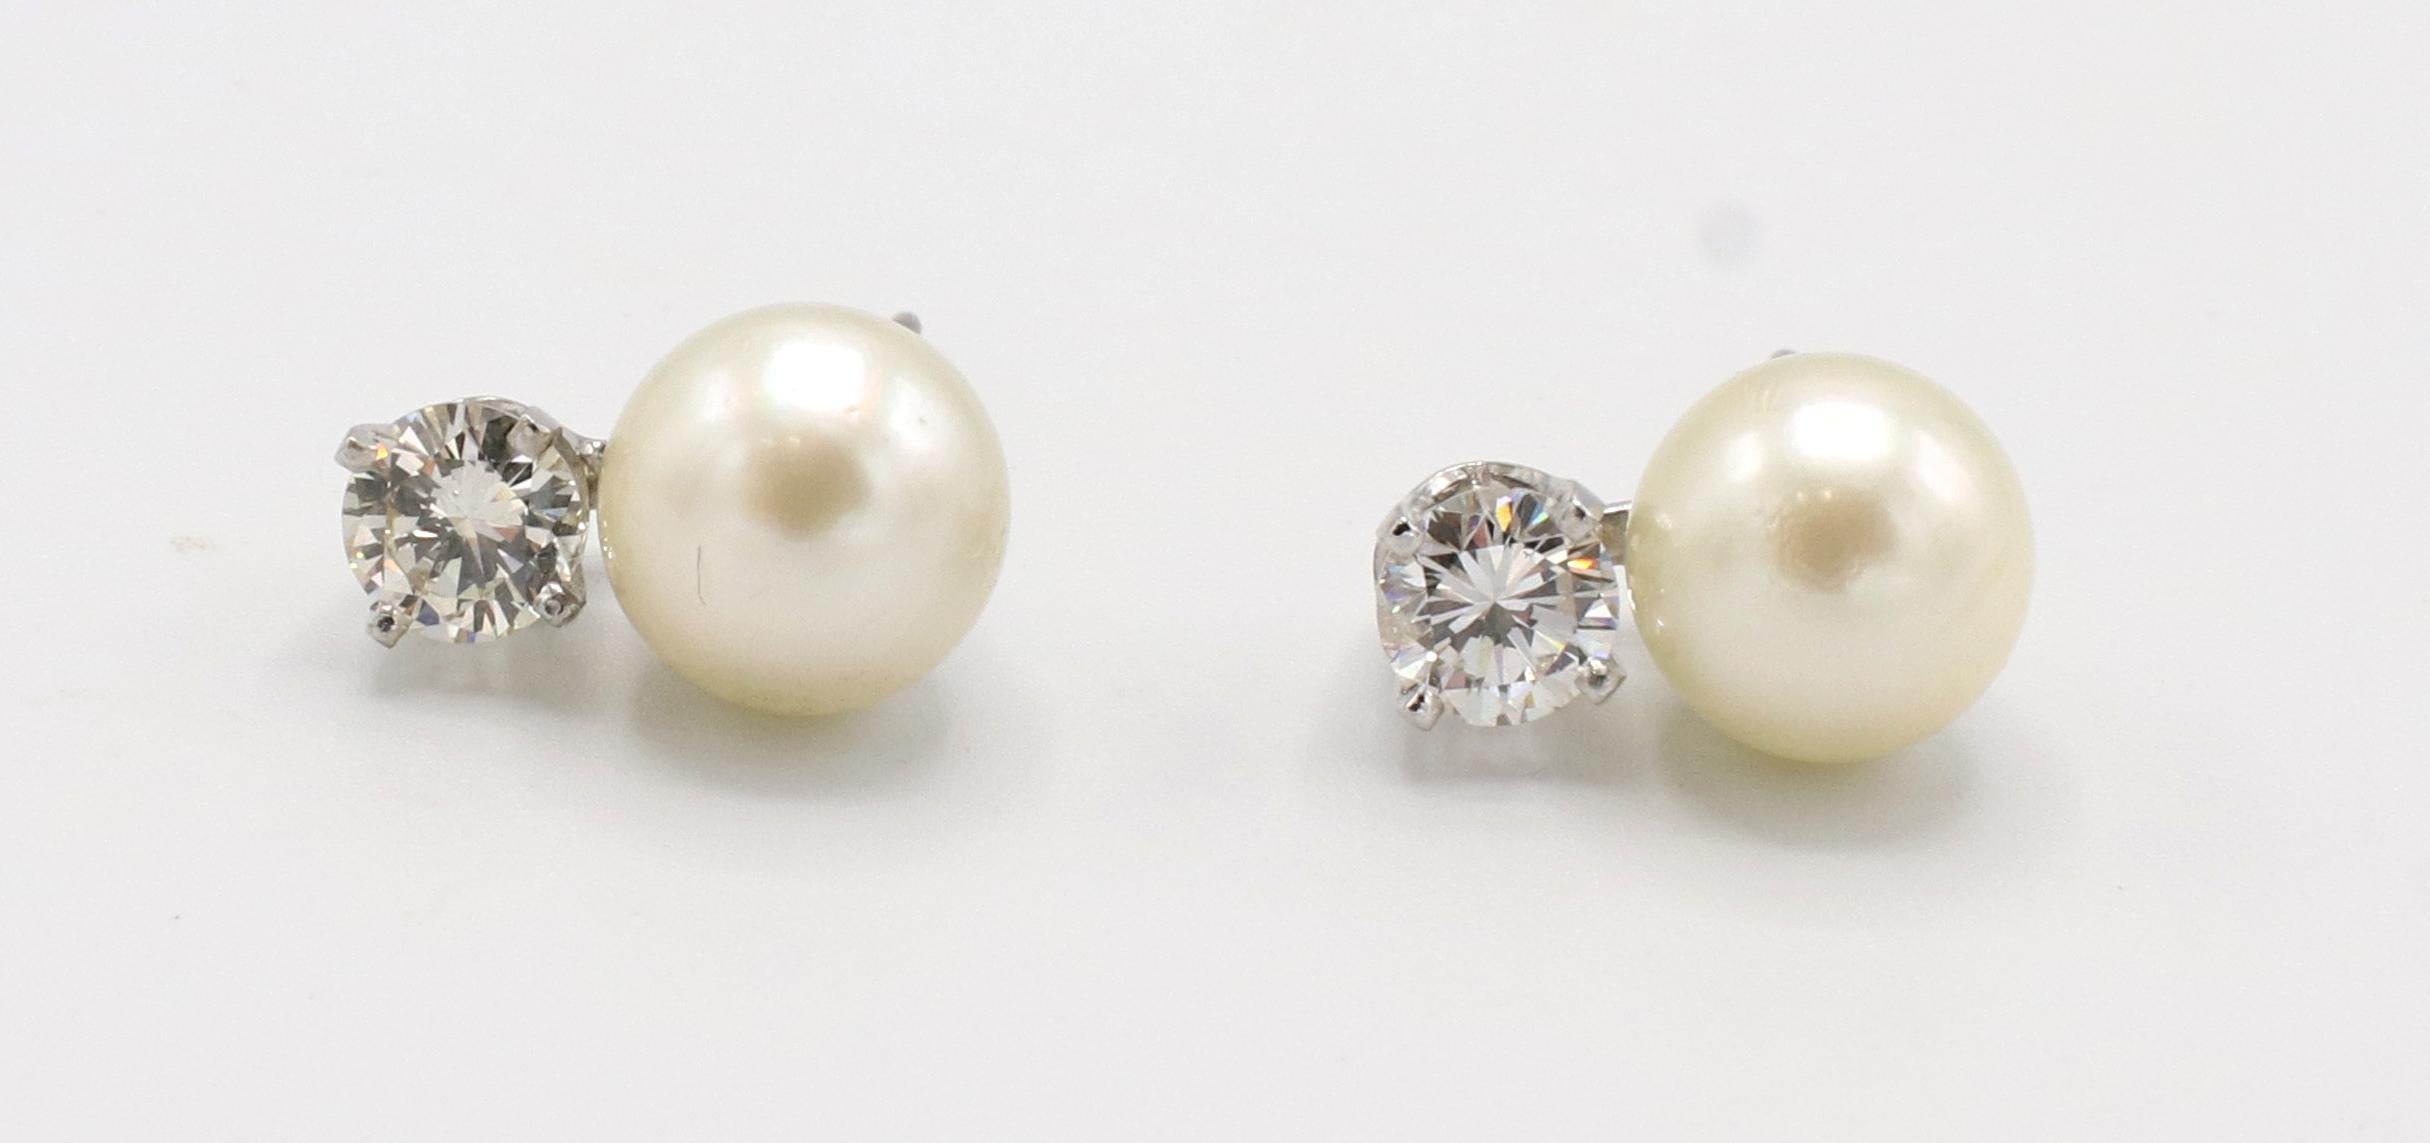 14 Karat White Gold Pearl & Natural Diamond Stud Earrings 
Metal: 14k white gold
Weight: 3.33 grams
Pearls: 7.7mm, white with a creamy luster
Diamonds: Approx. .68 CTW G-H VS-SI1 round natural diamonds
Length: 12mm

